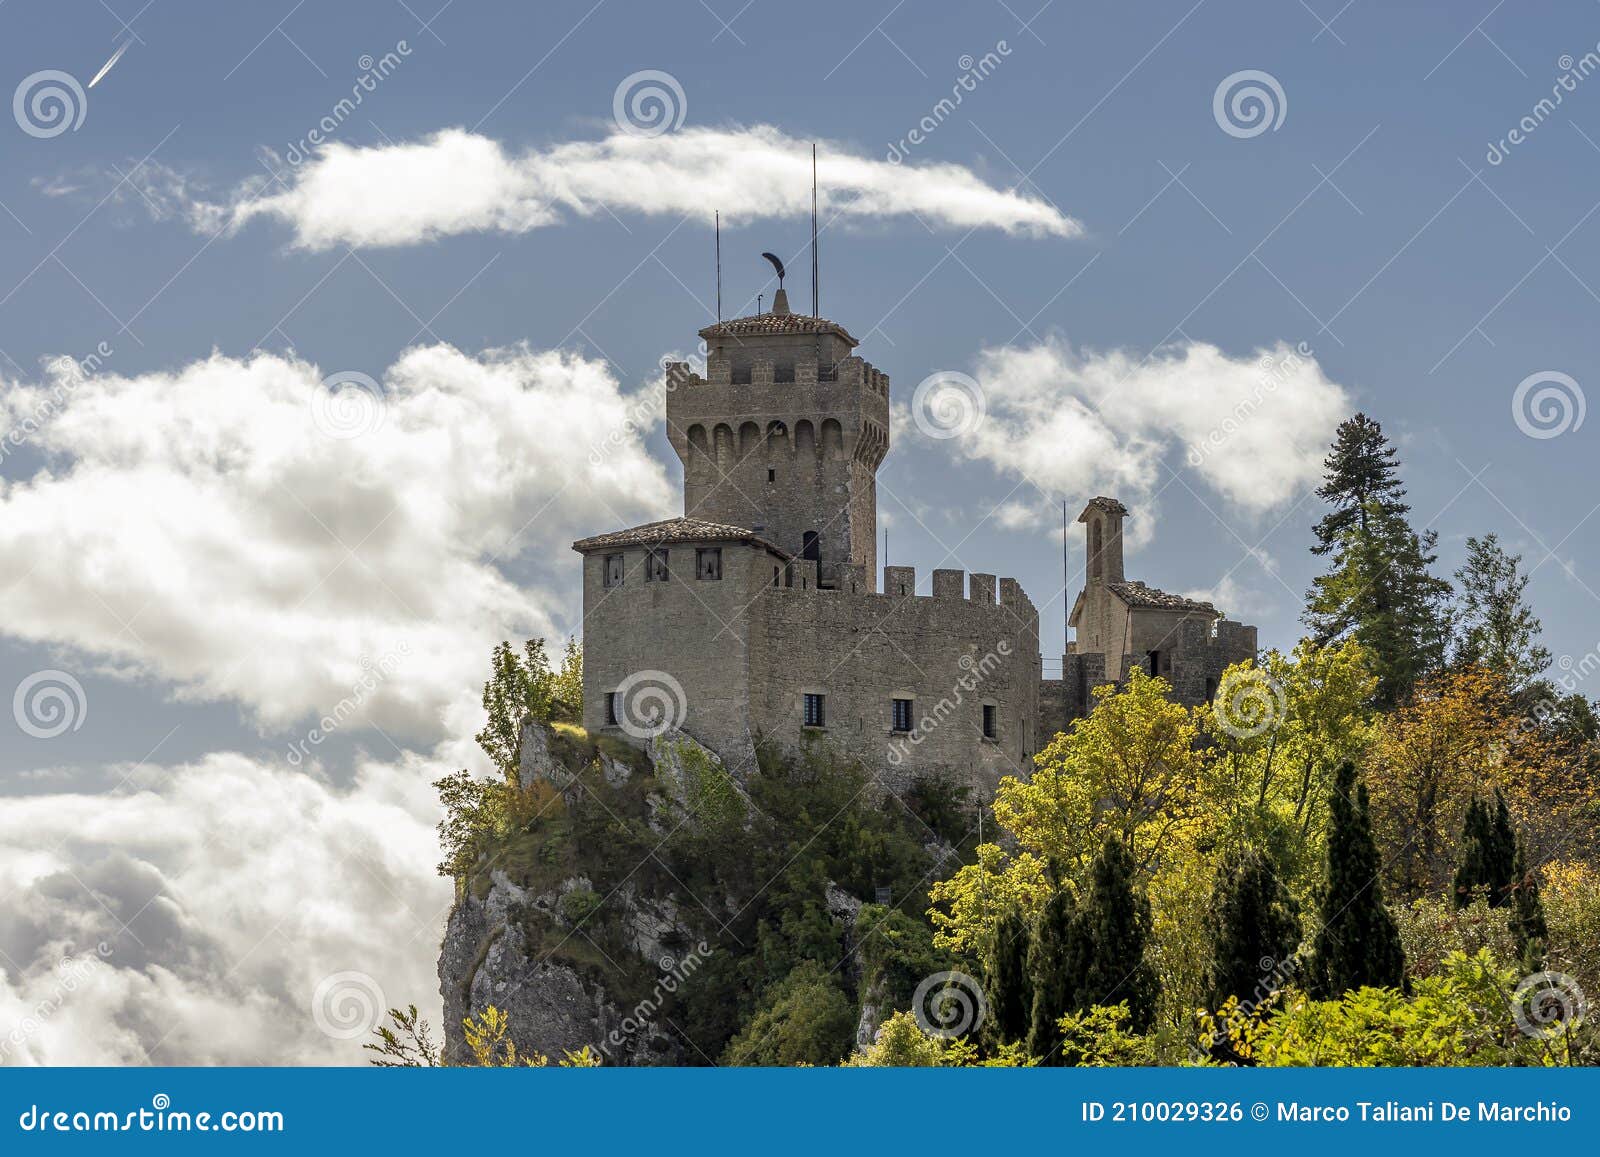 la cesta, also known as fratta or second tower, is one of the three towers that dominate the city of san marino